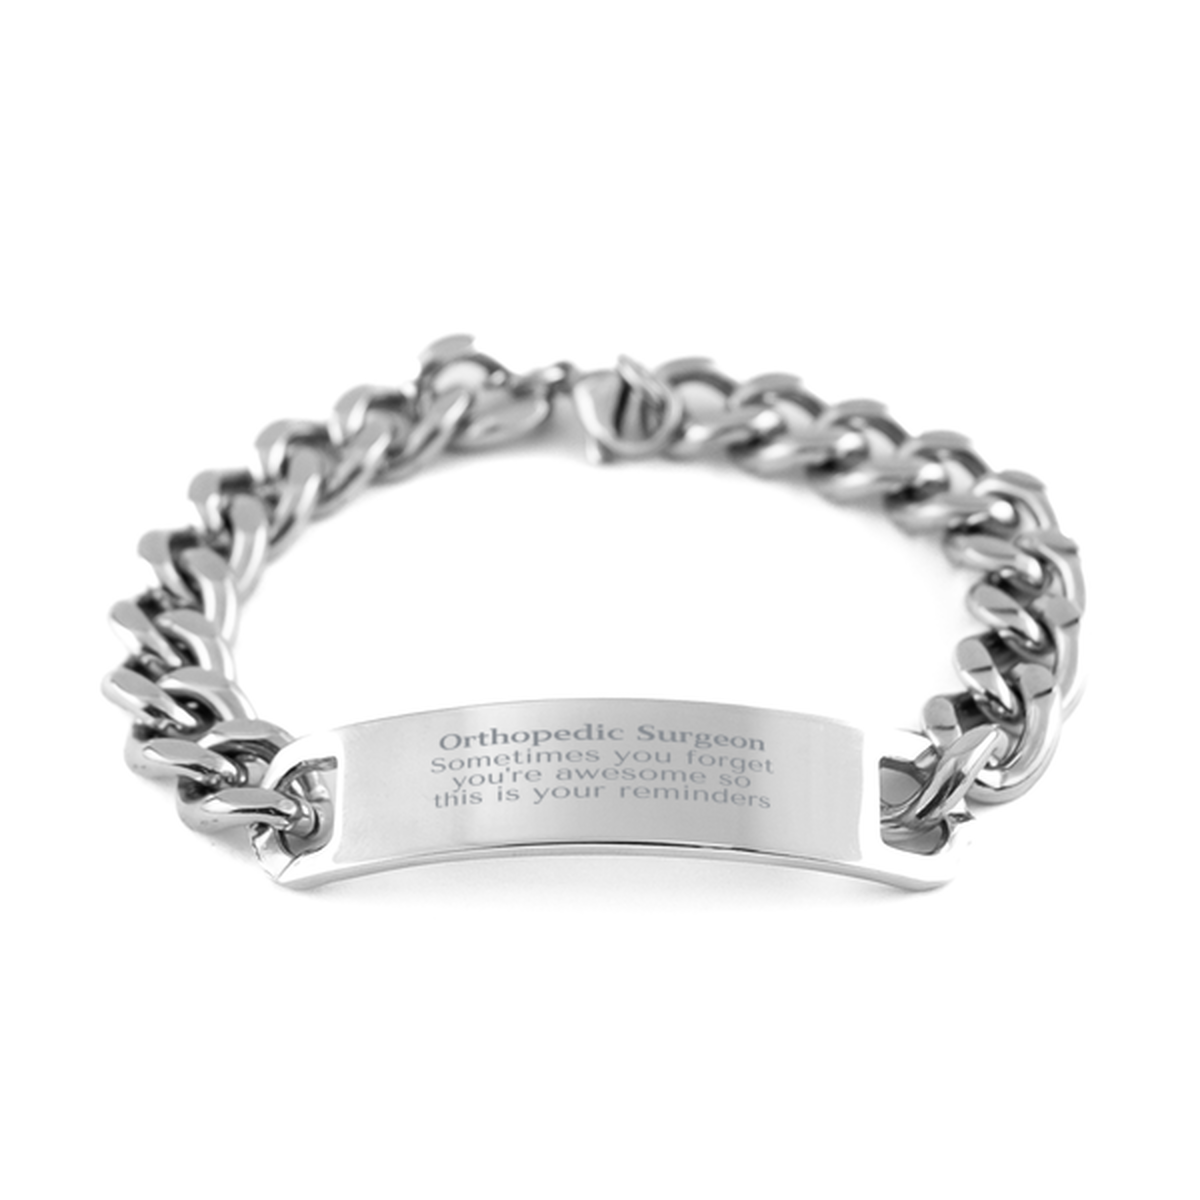 Sentimental Orthopedic Surgeon Cuban Chain Stainless Steel Bracelet, Orthopedic Surgeon Sometimes you forget you're awesome so this is your reminders, Graduation Christmas Birthday Gifts for Orthopedic Surgeon, Men, Women, Coworkers